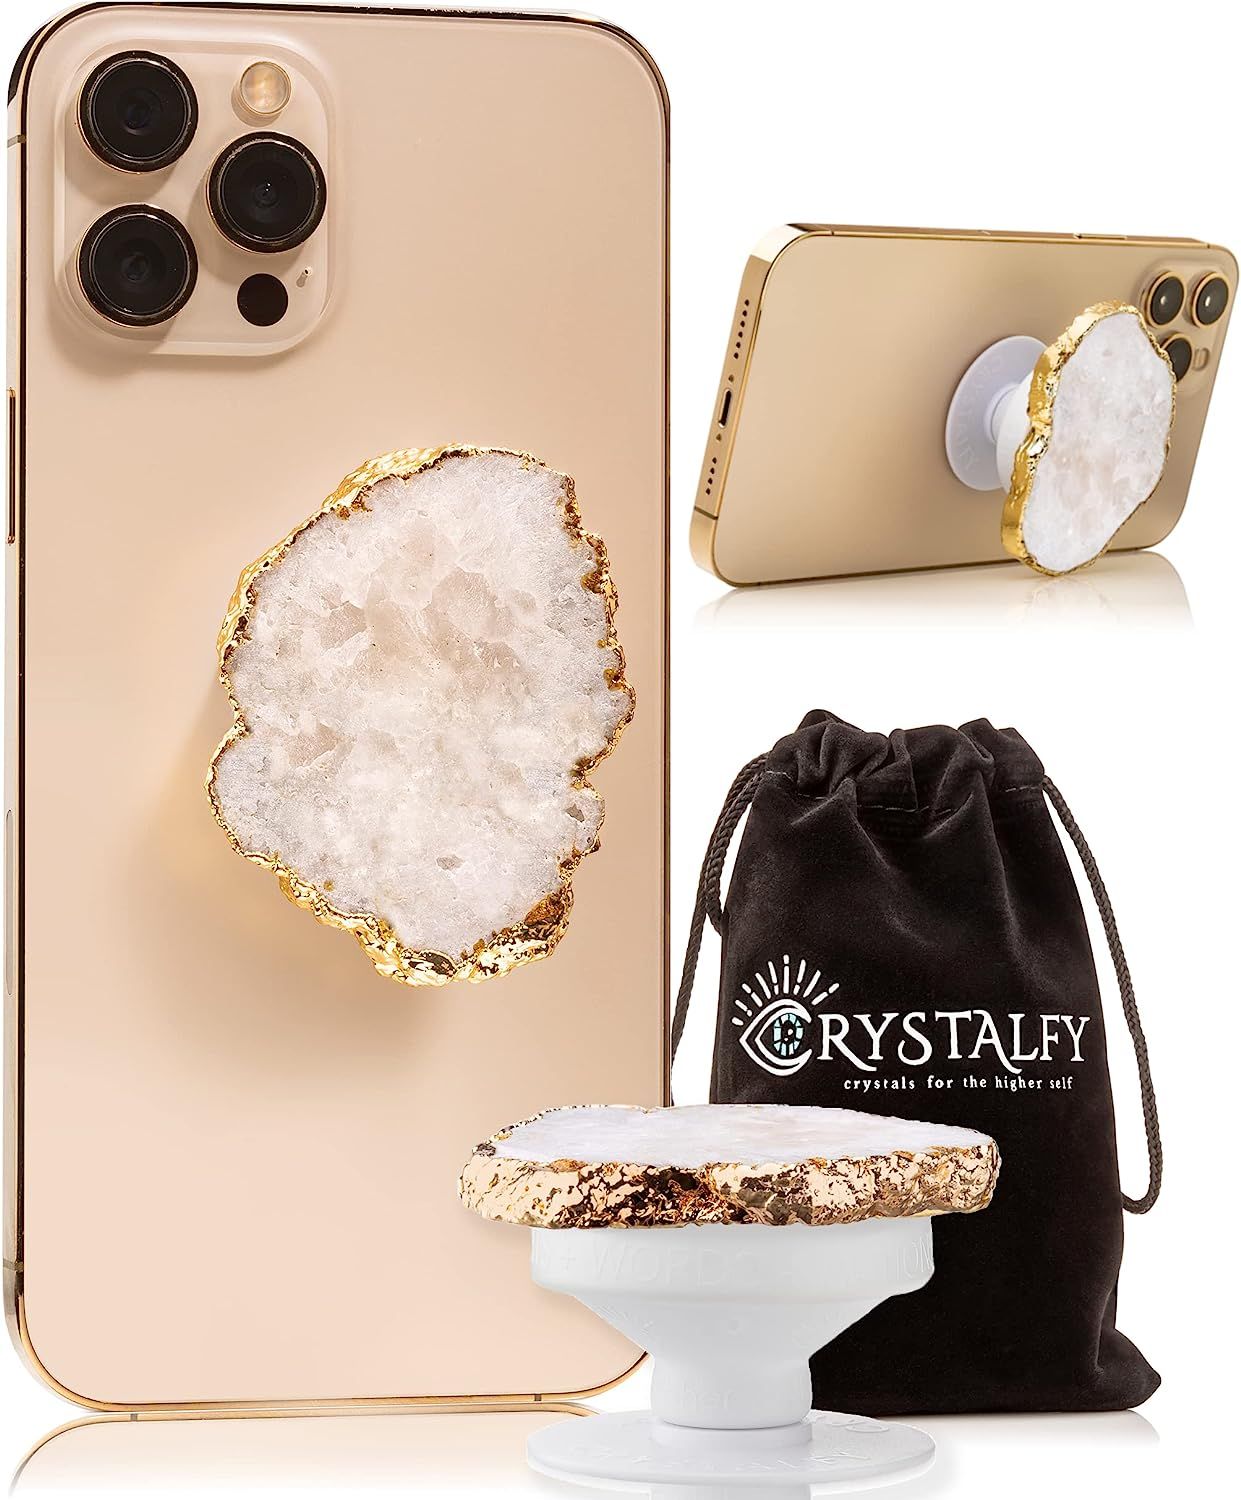 CRYSTALFY Crystal Phone Grip & Phone Stand: Authentic Natural Gemstone Swappable Top, Expandable ... | Amazon (US)